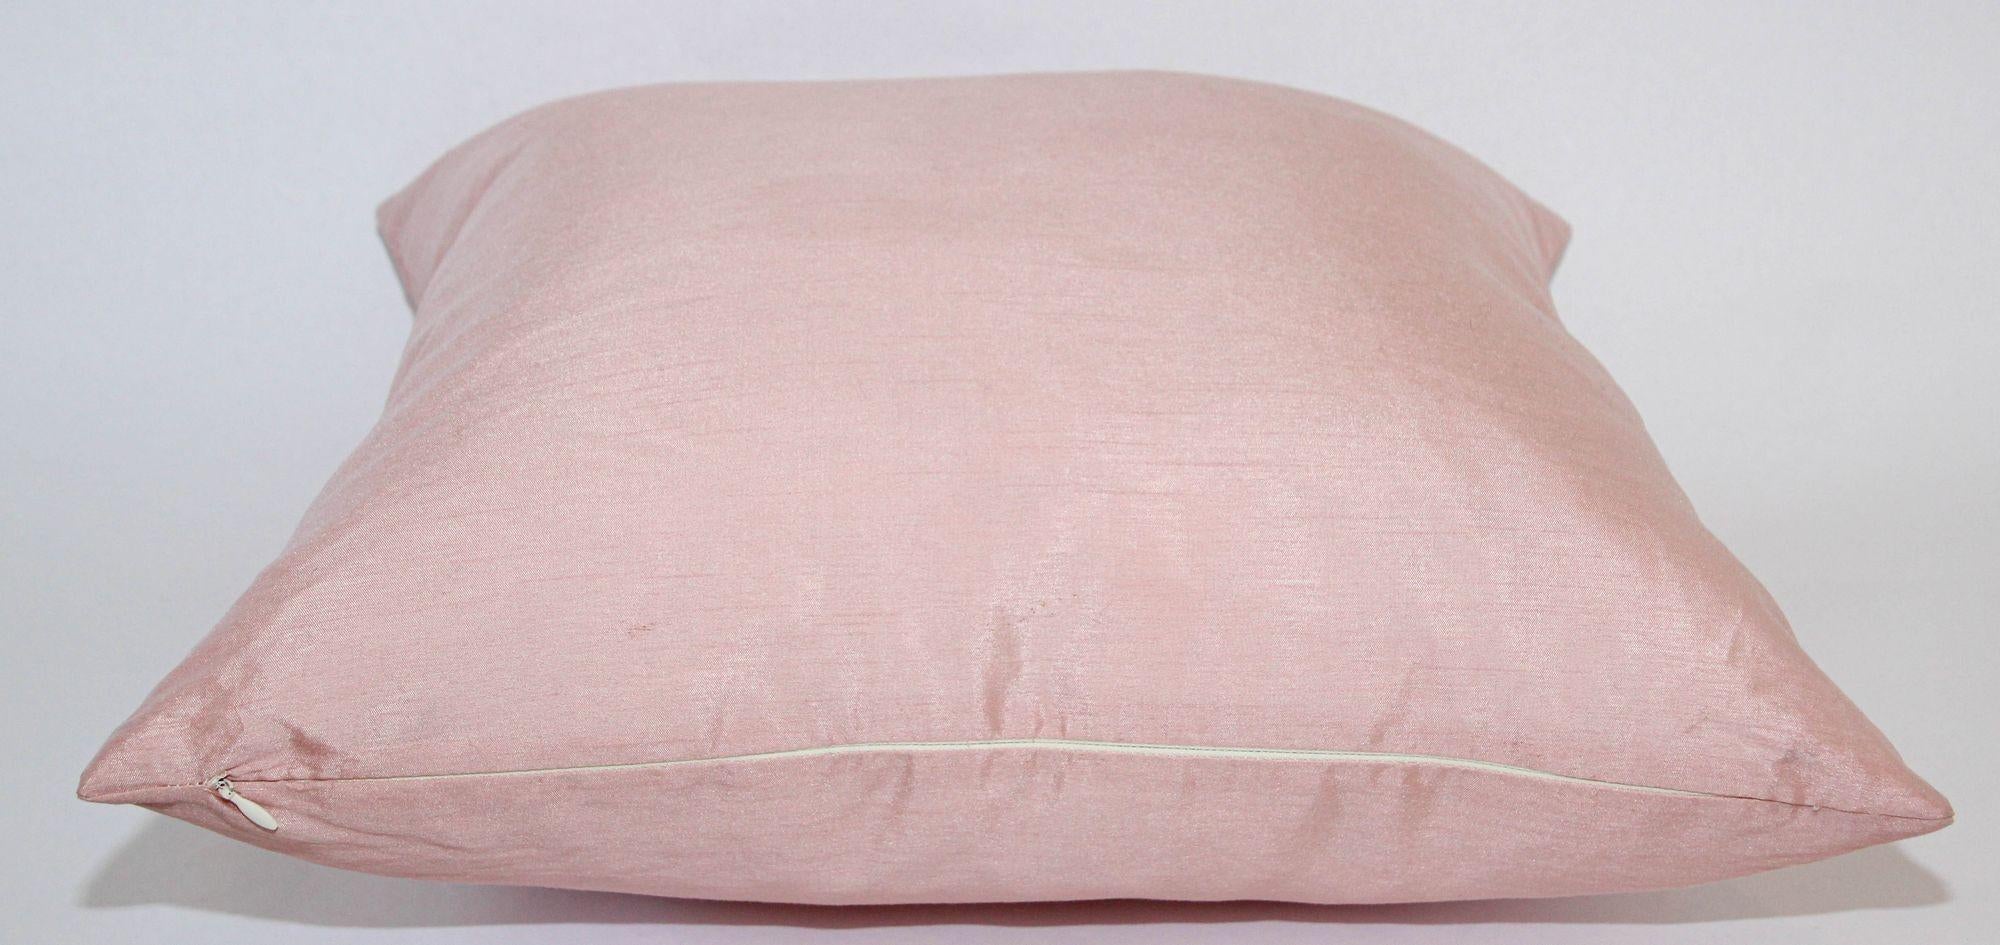 Blush Pink Dupioni Silk luxury Decorative Throw Pillow In Good Condition For Sale In North Hollywood, CA